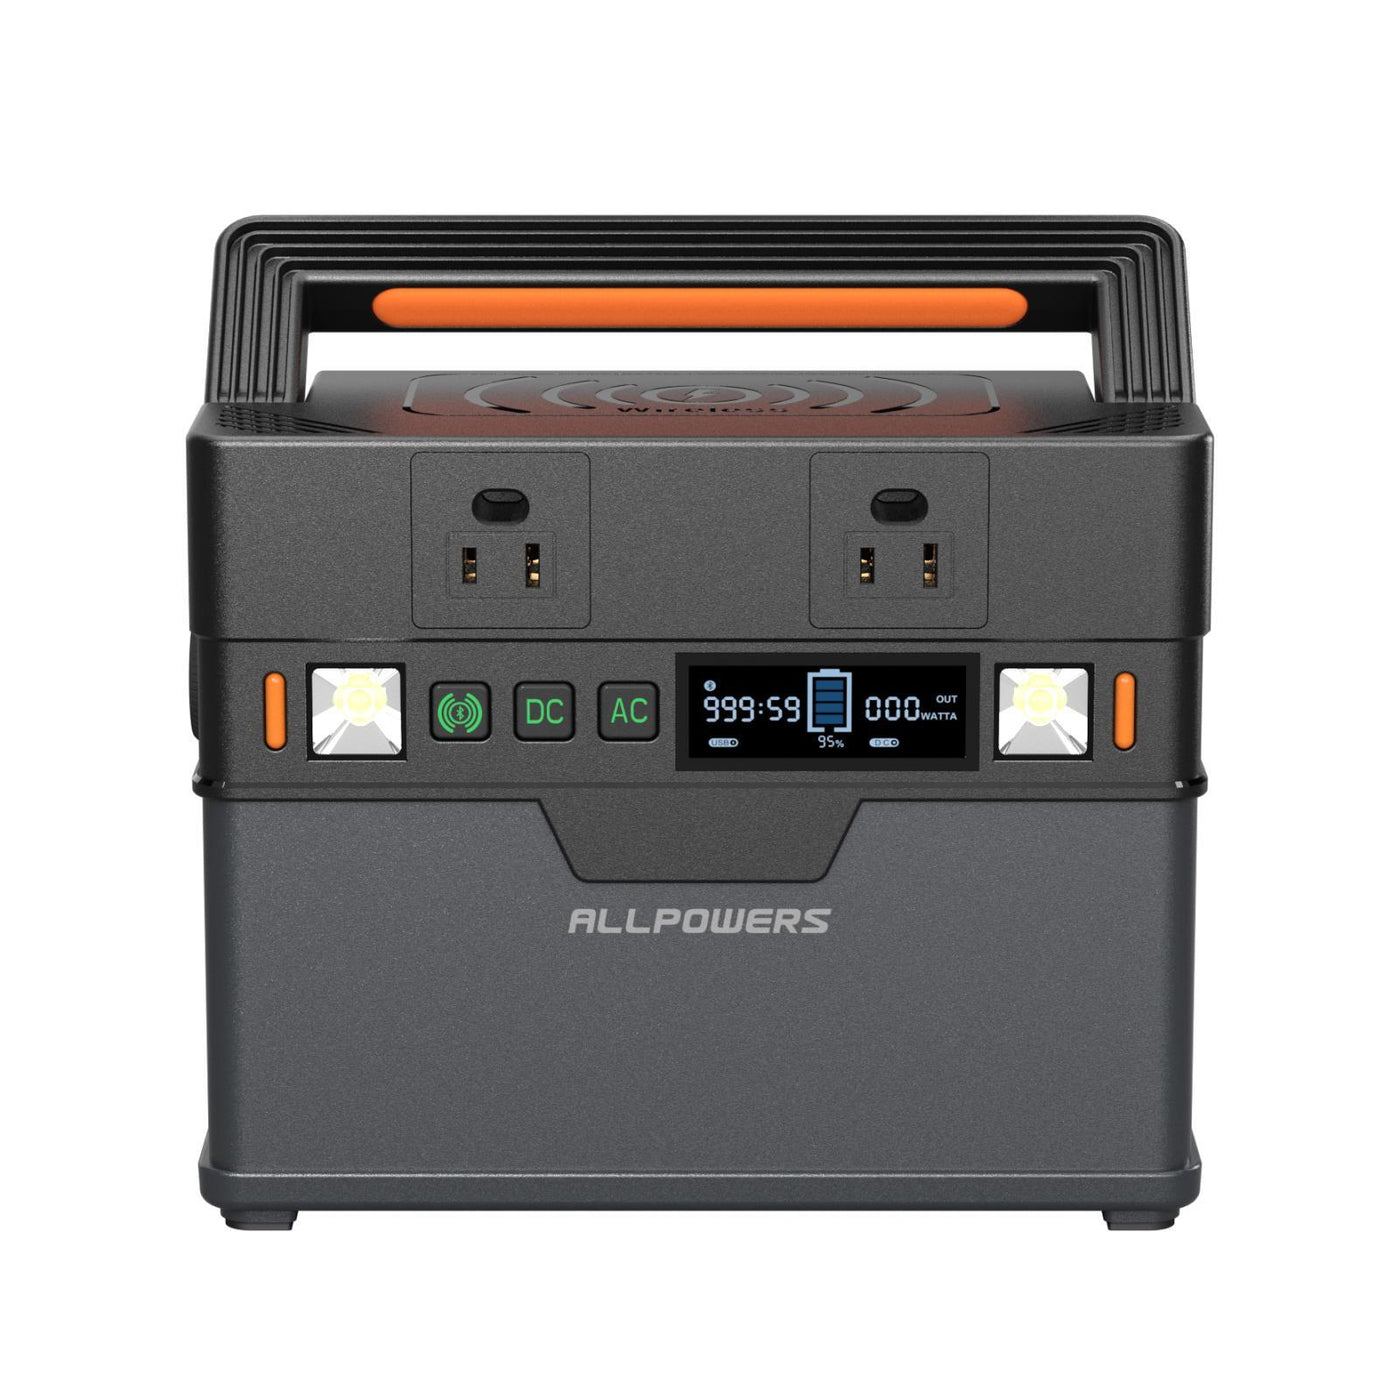 ALLPOWERS S300 ポータブル電源(288Wh/300W)【8月14日まで限定30%OFF